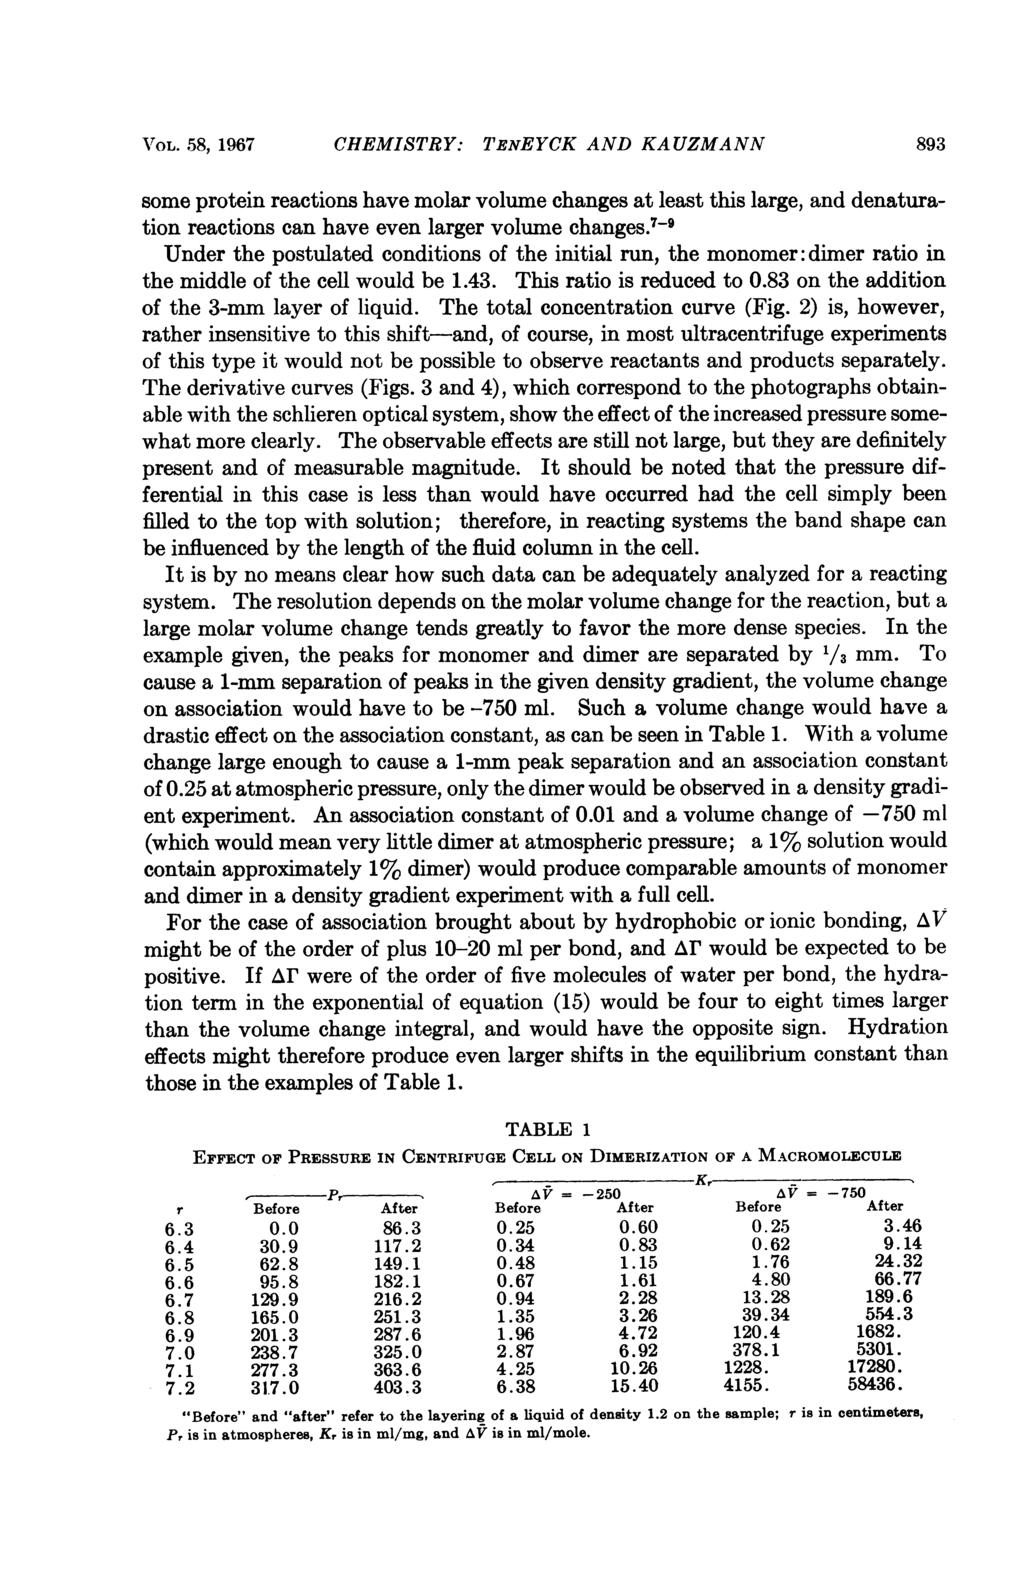 VrOL. 58, 1967 CHEMISTRY: TENEYCK AND KAUZMANN 893 some protein reactions have molar volume changes at least this large, and denaturation reactions can have even larger volume changes.